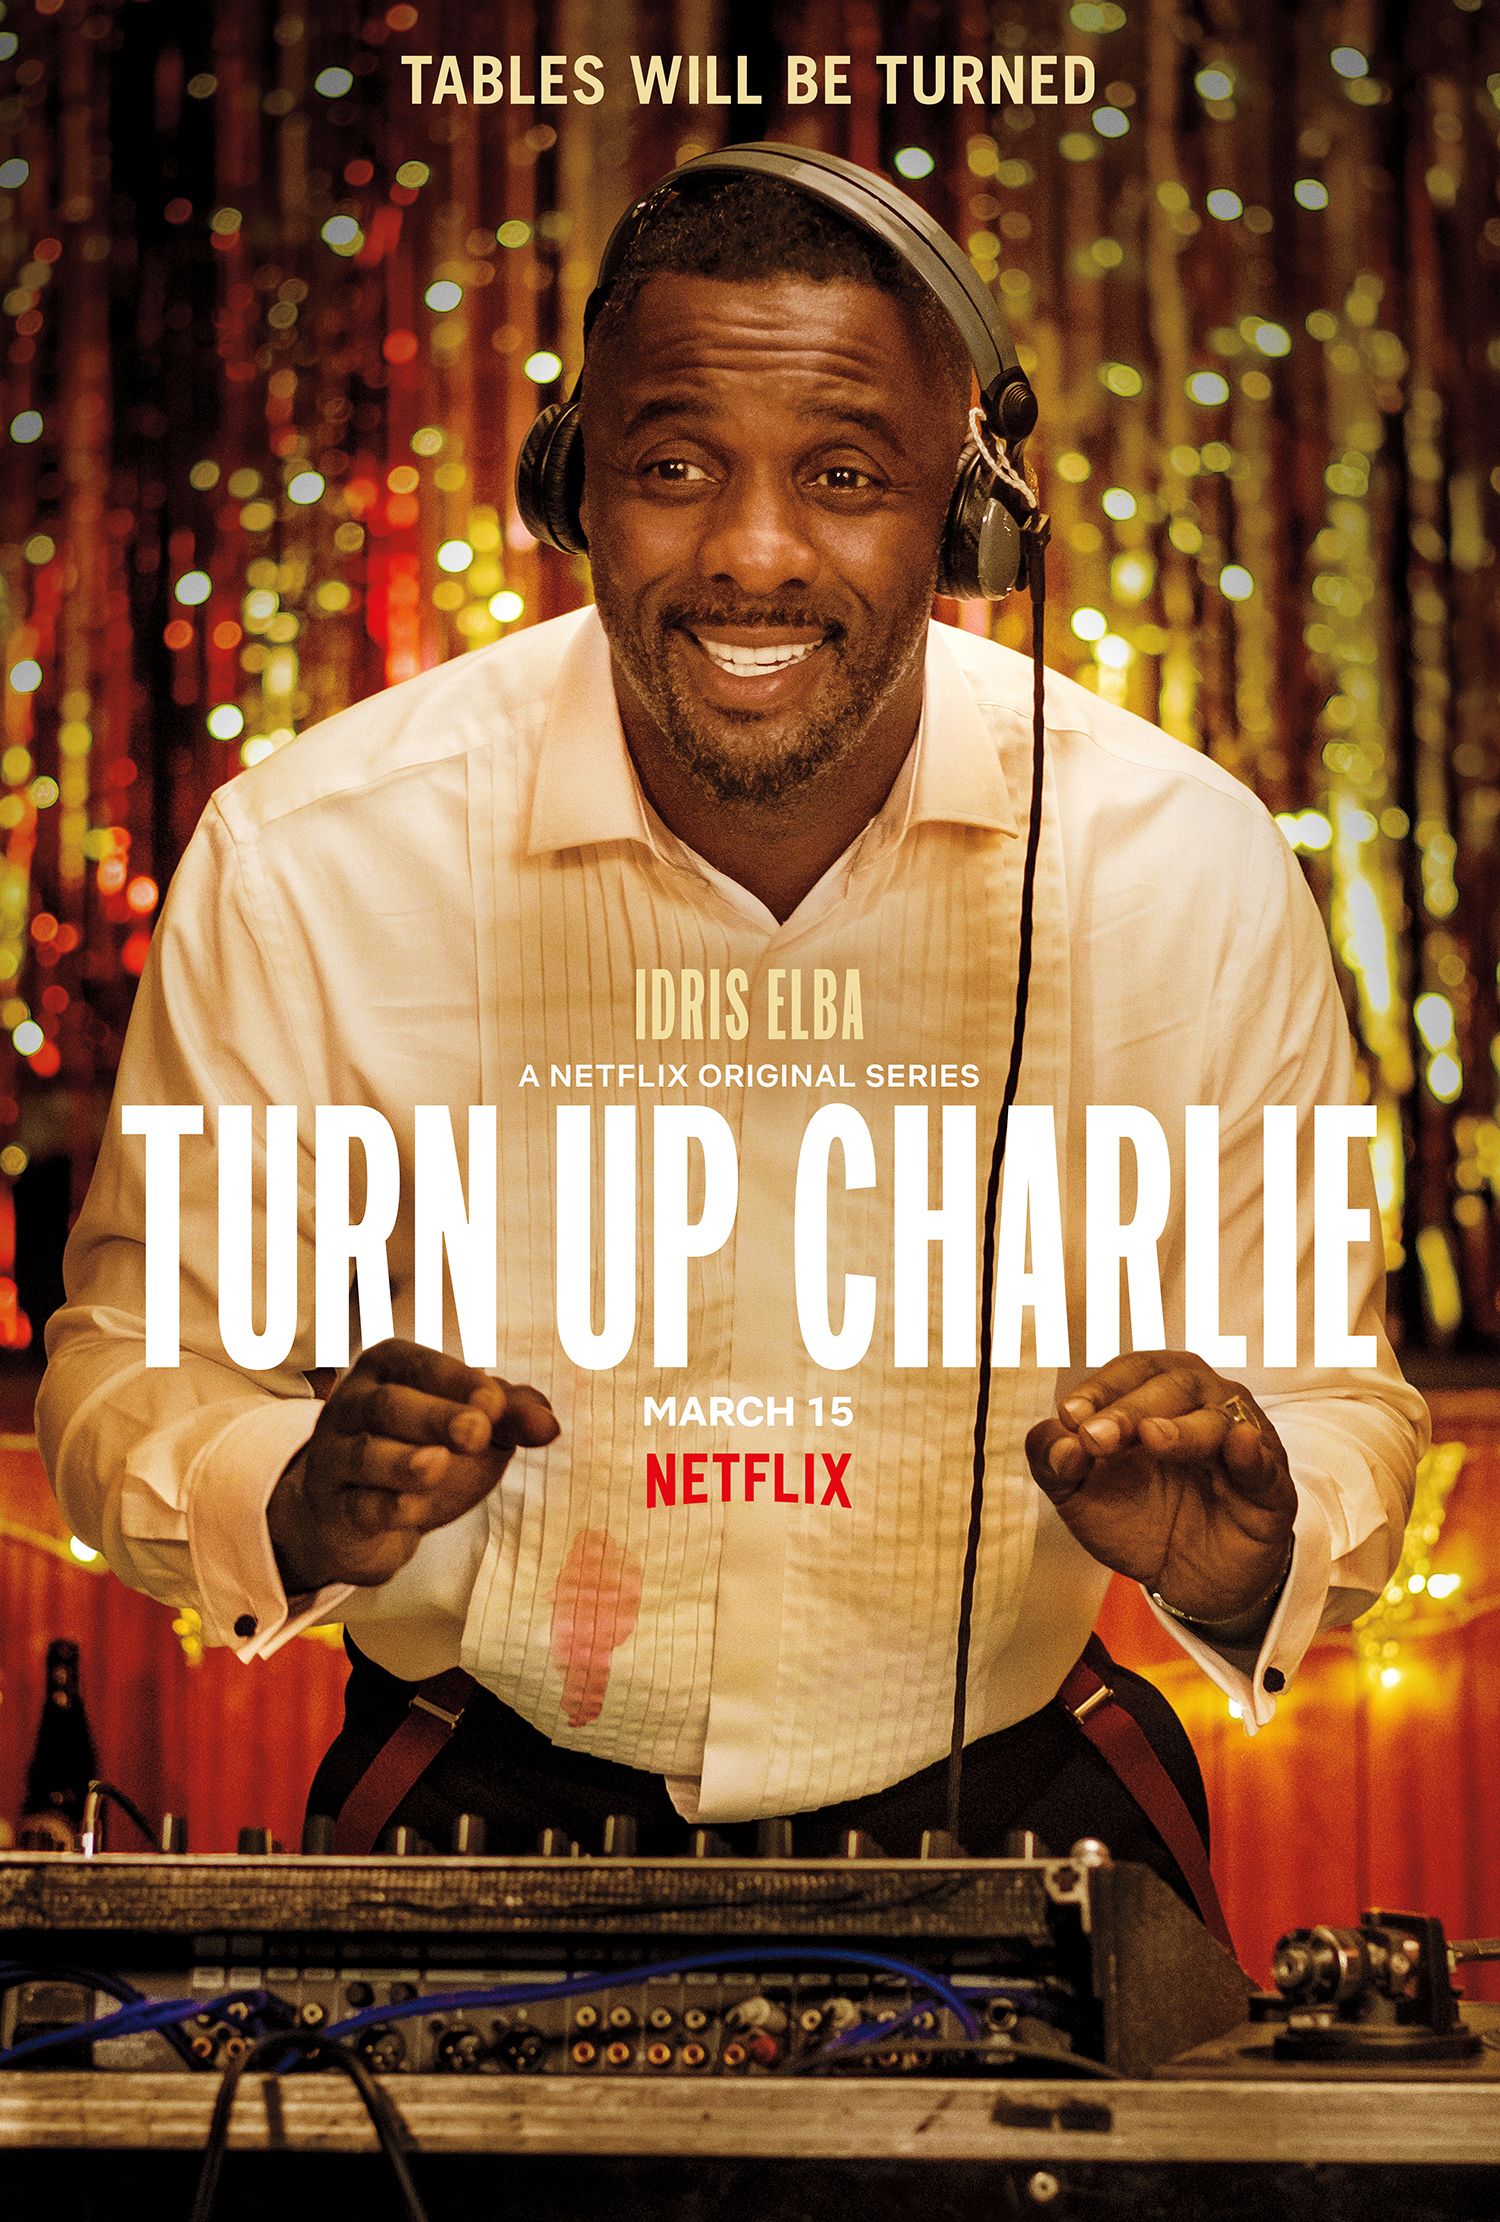 Idris Elba on Turn Up Charlie and Wanting to Do More Comedy | Collider1500 x 2222